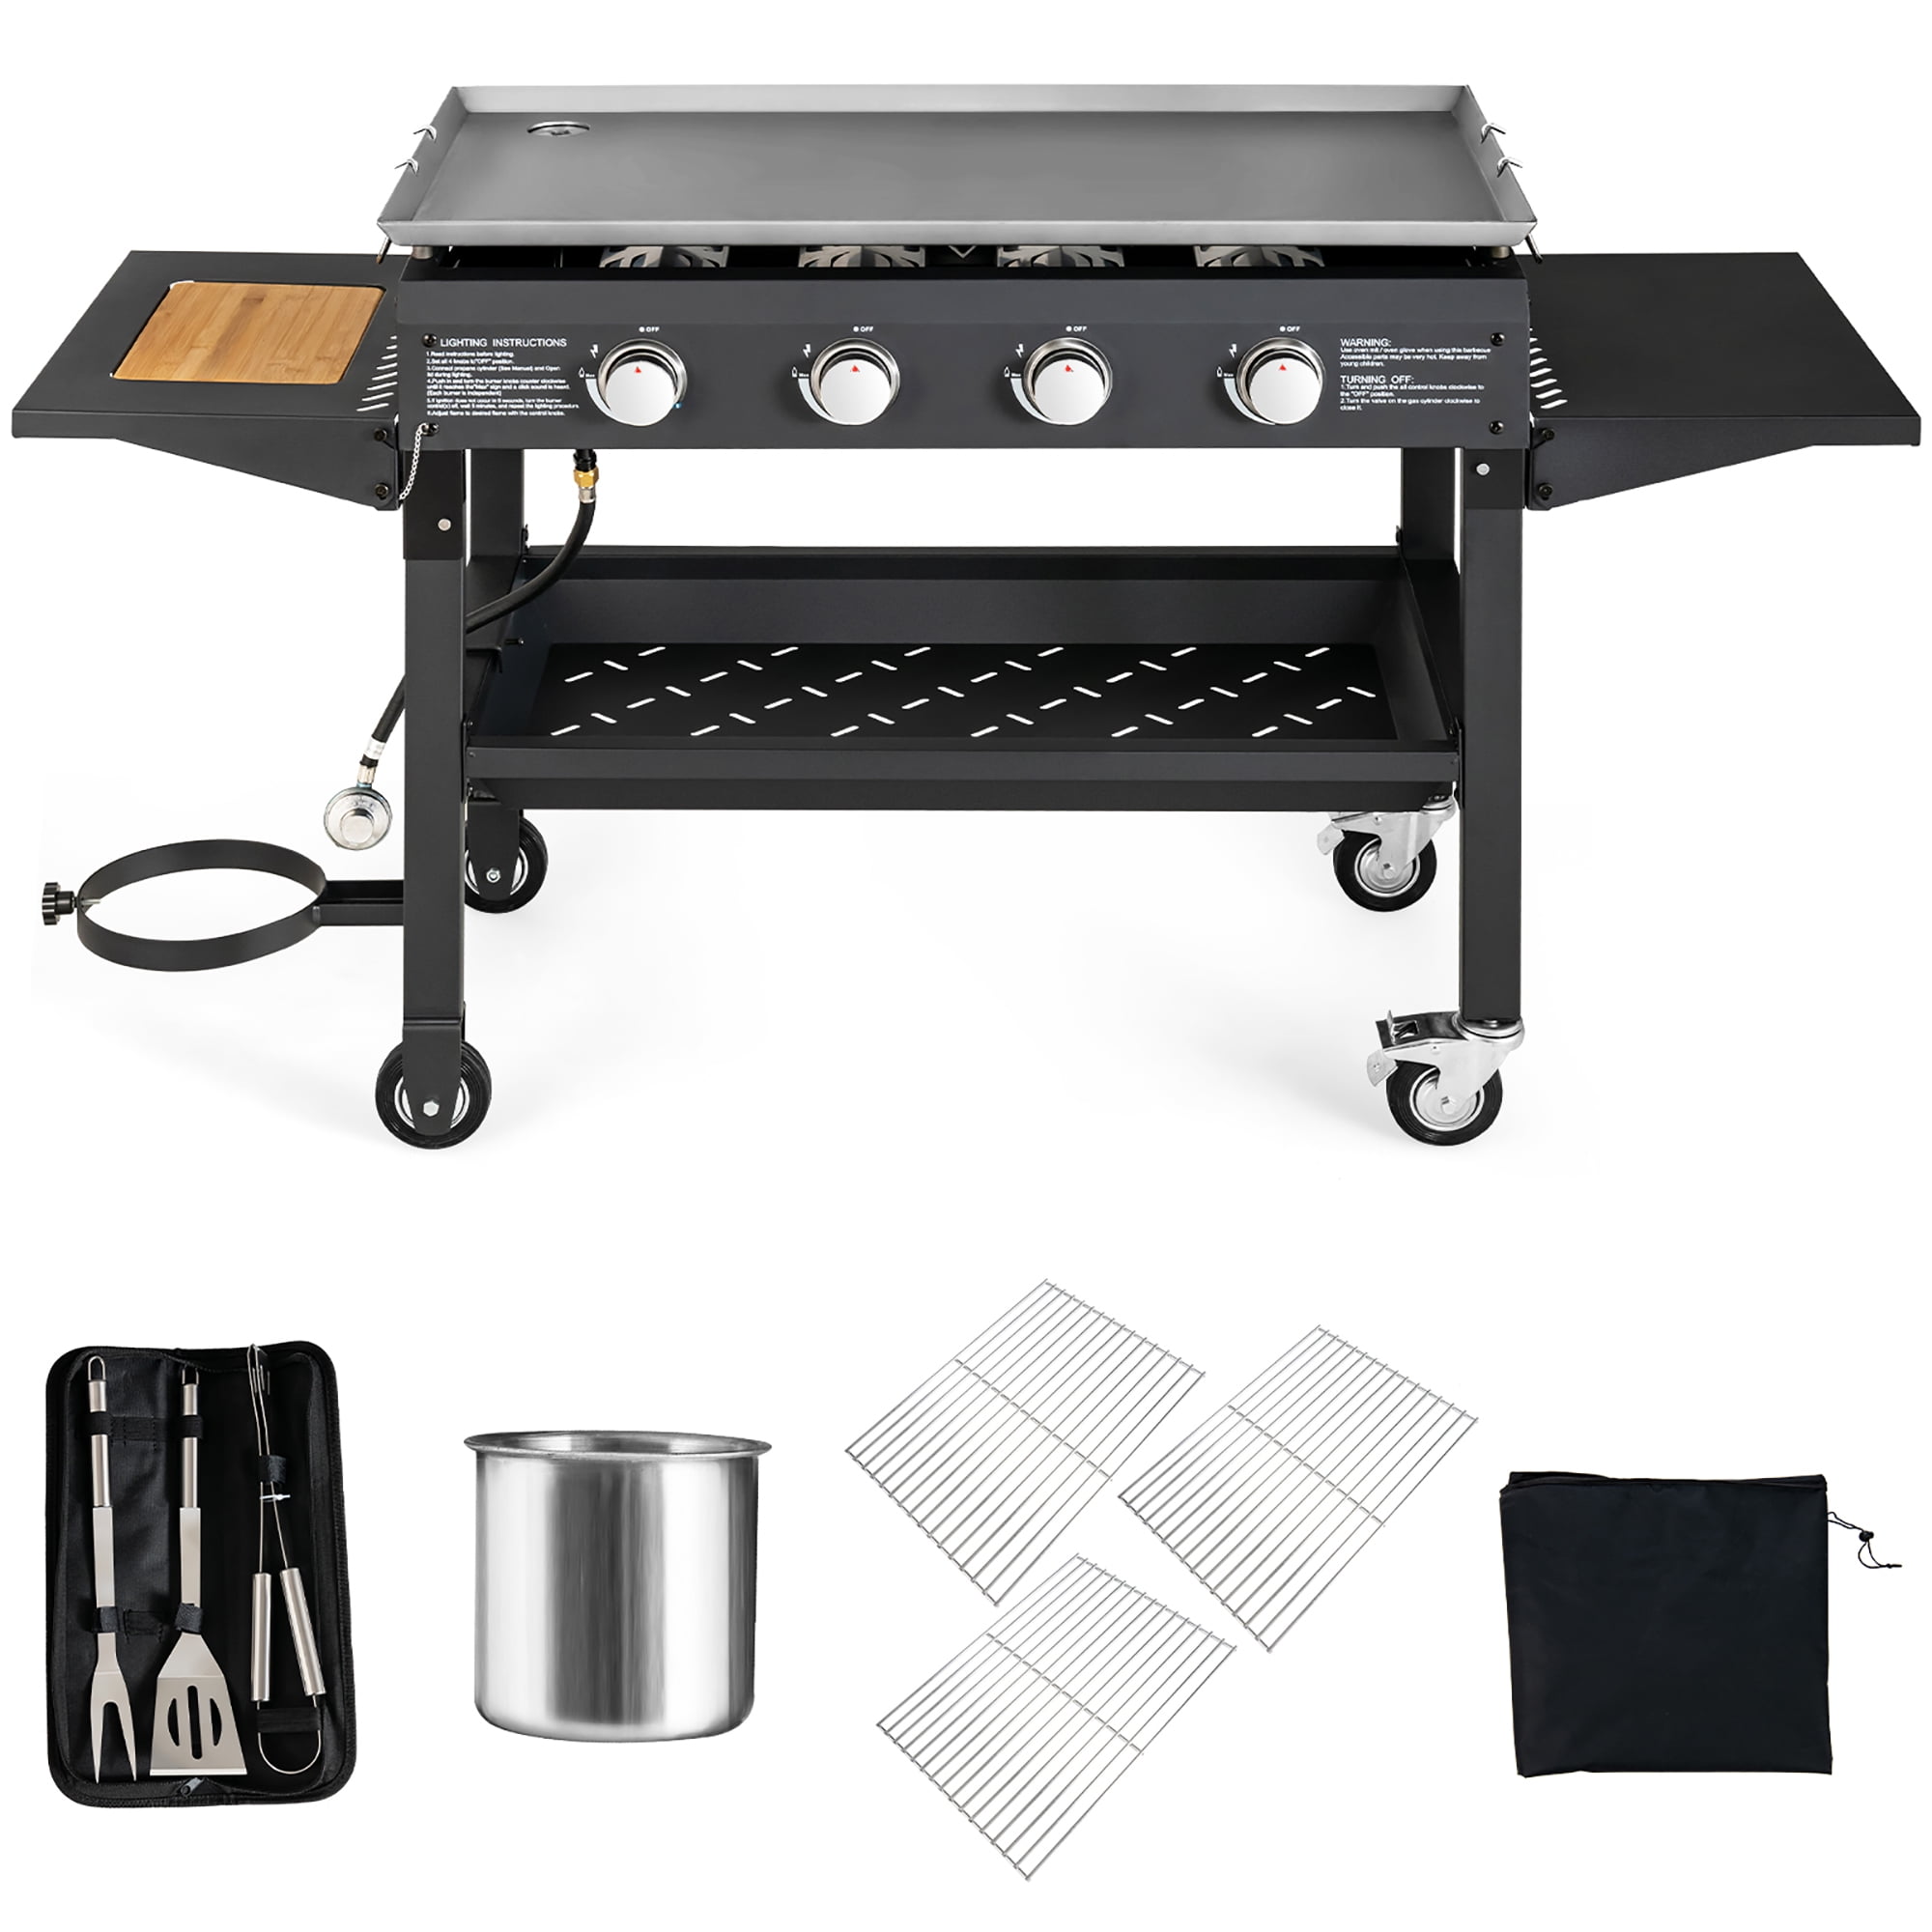 Le Griddle Grand Texan 60-Inch 4-Burner Freestanding Propane Gas Commercial  Style Flat Top Griddle - GFE160 + GFCART160